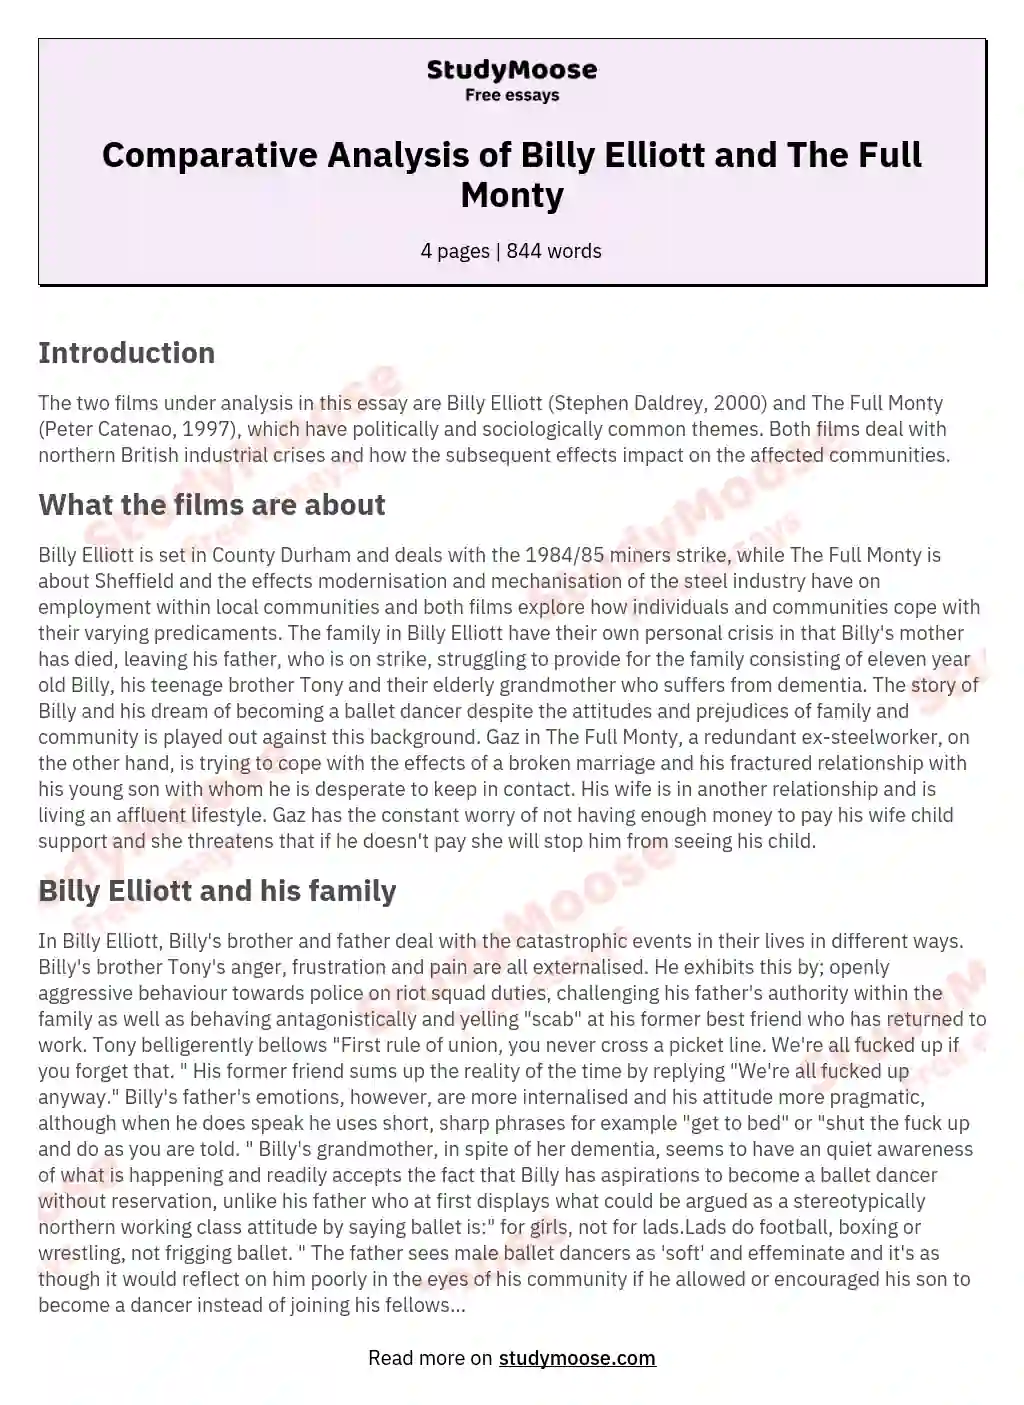 Comparative Analysis of Billy Elliott and The Full Monty essay